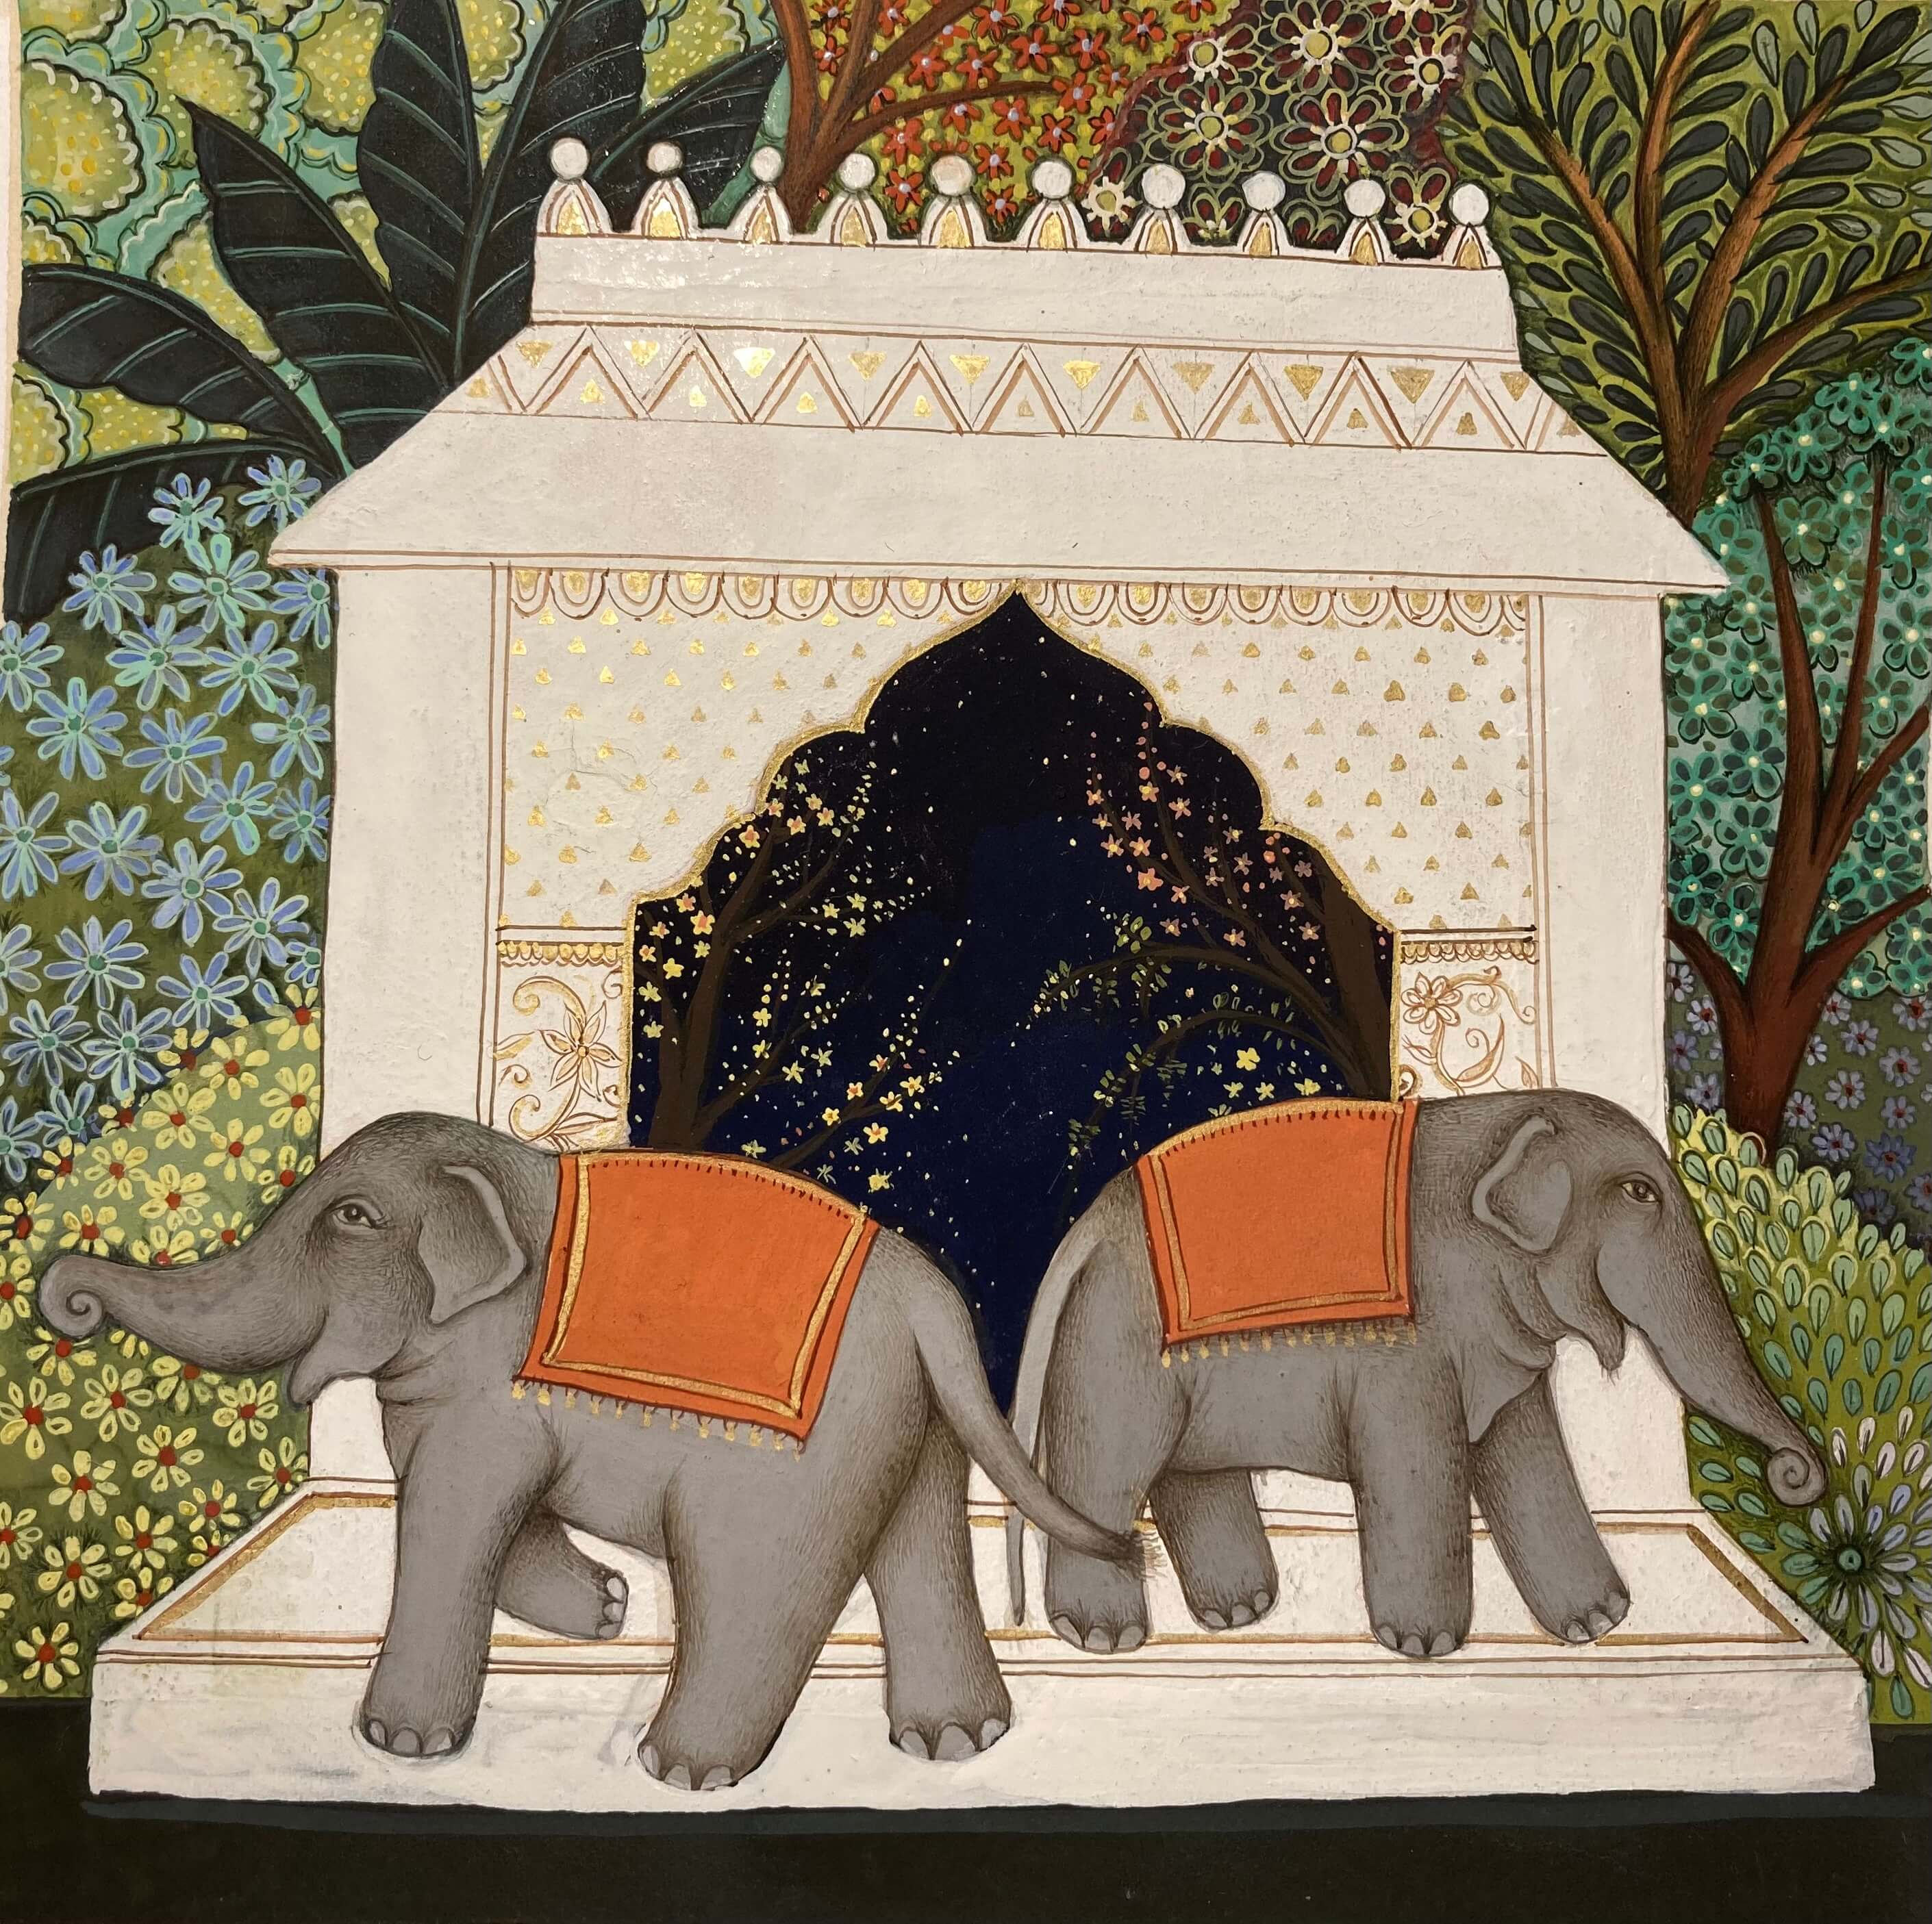 Painting by artist Samantha Buckley in Indian miniature style of two elephants next to a a temple.